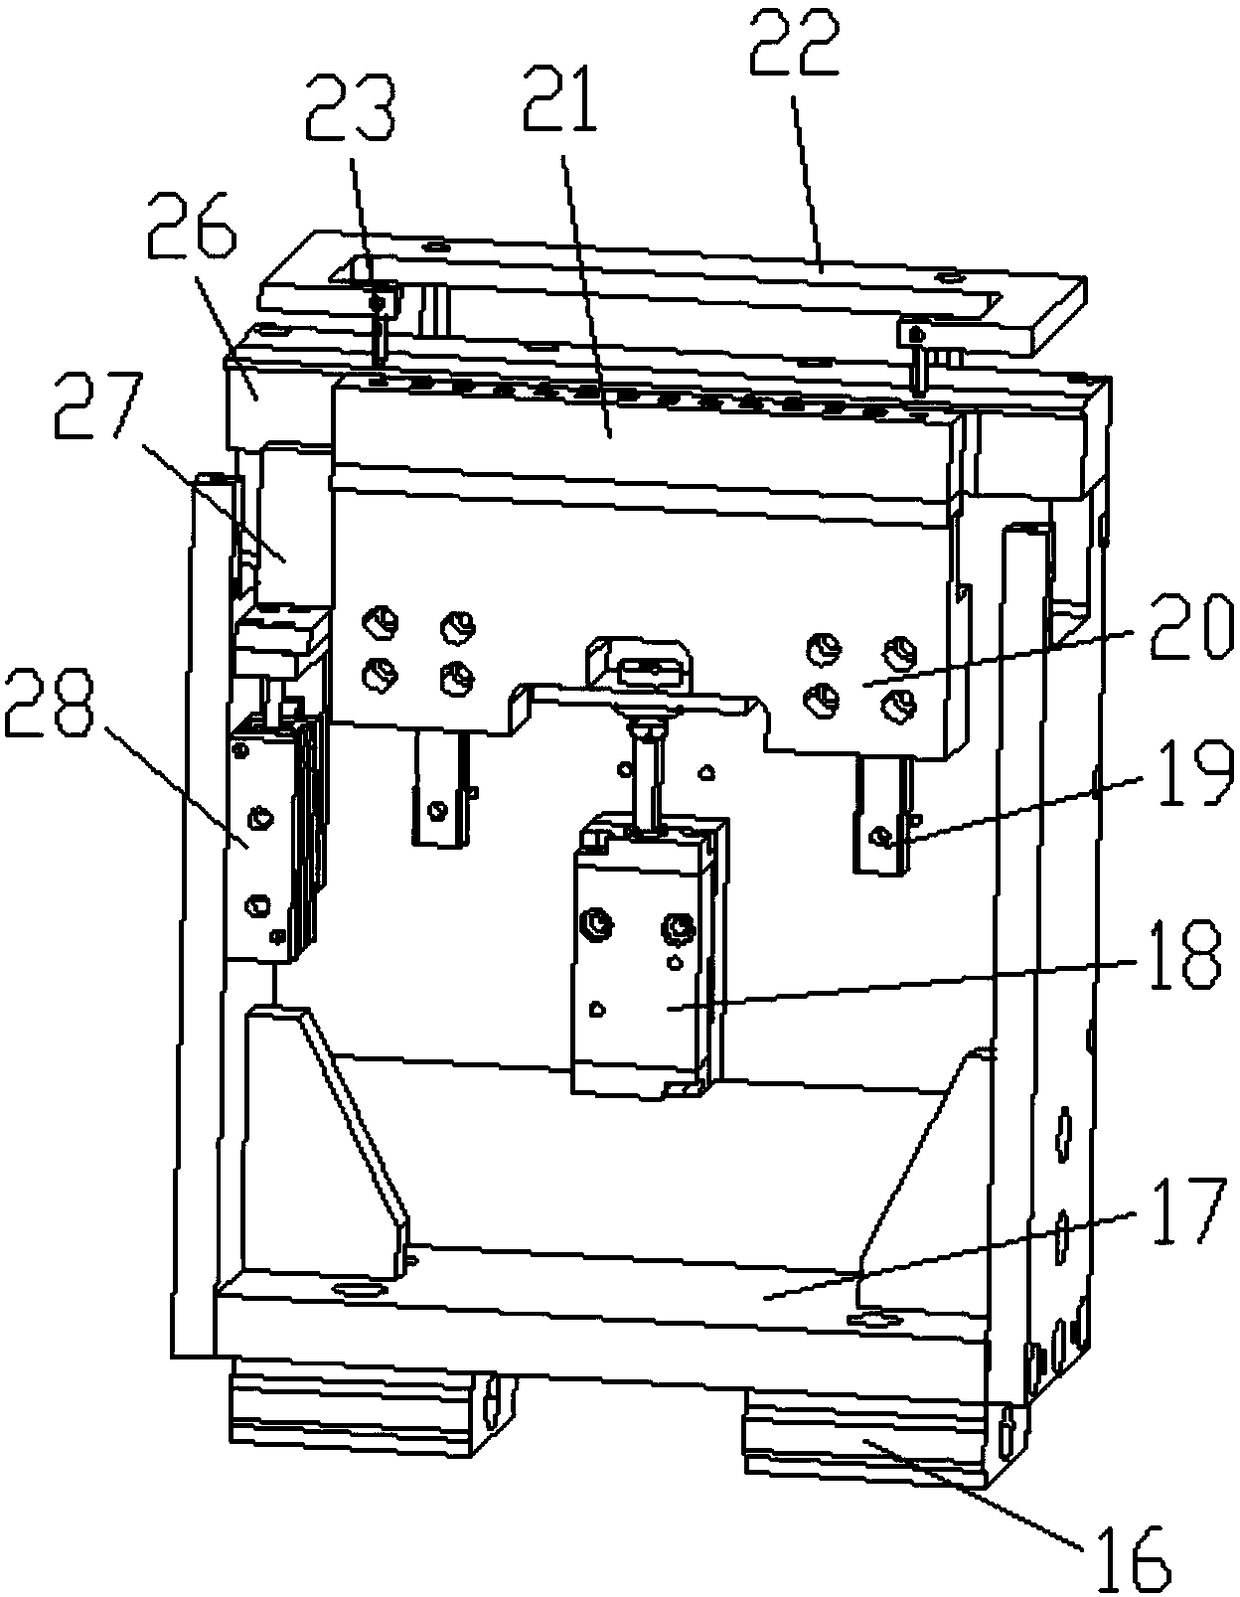 Multi-axis synchronous dispensing equipment